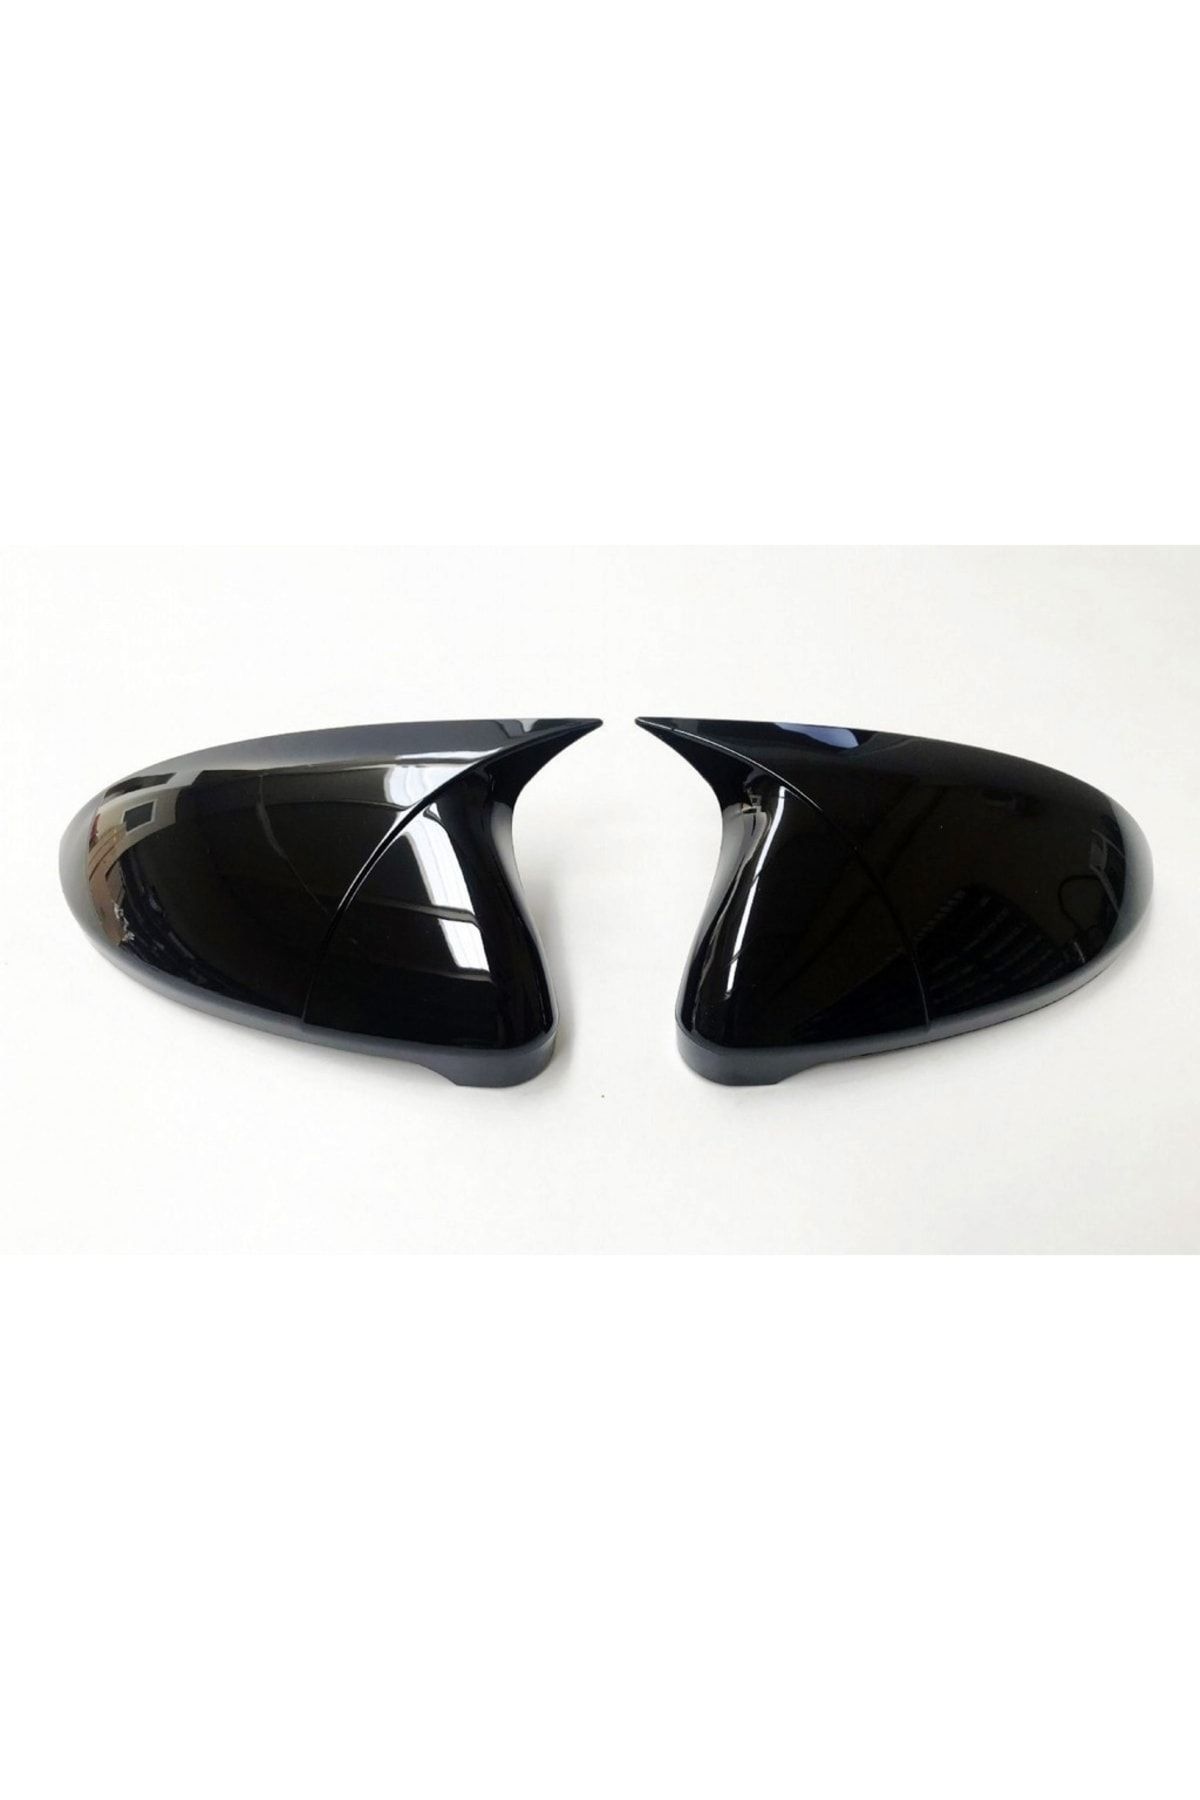 X POWER TUNİNG Peugeot 208 2012-2018 Glossy Black Batman Mirror Cover  Compatible - Trendyol